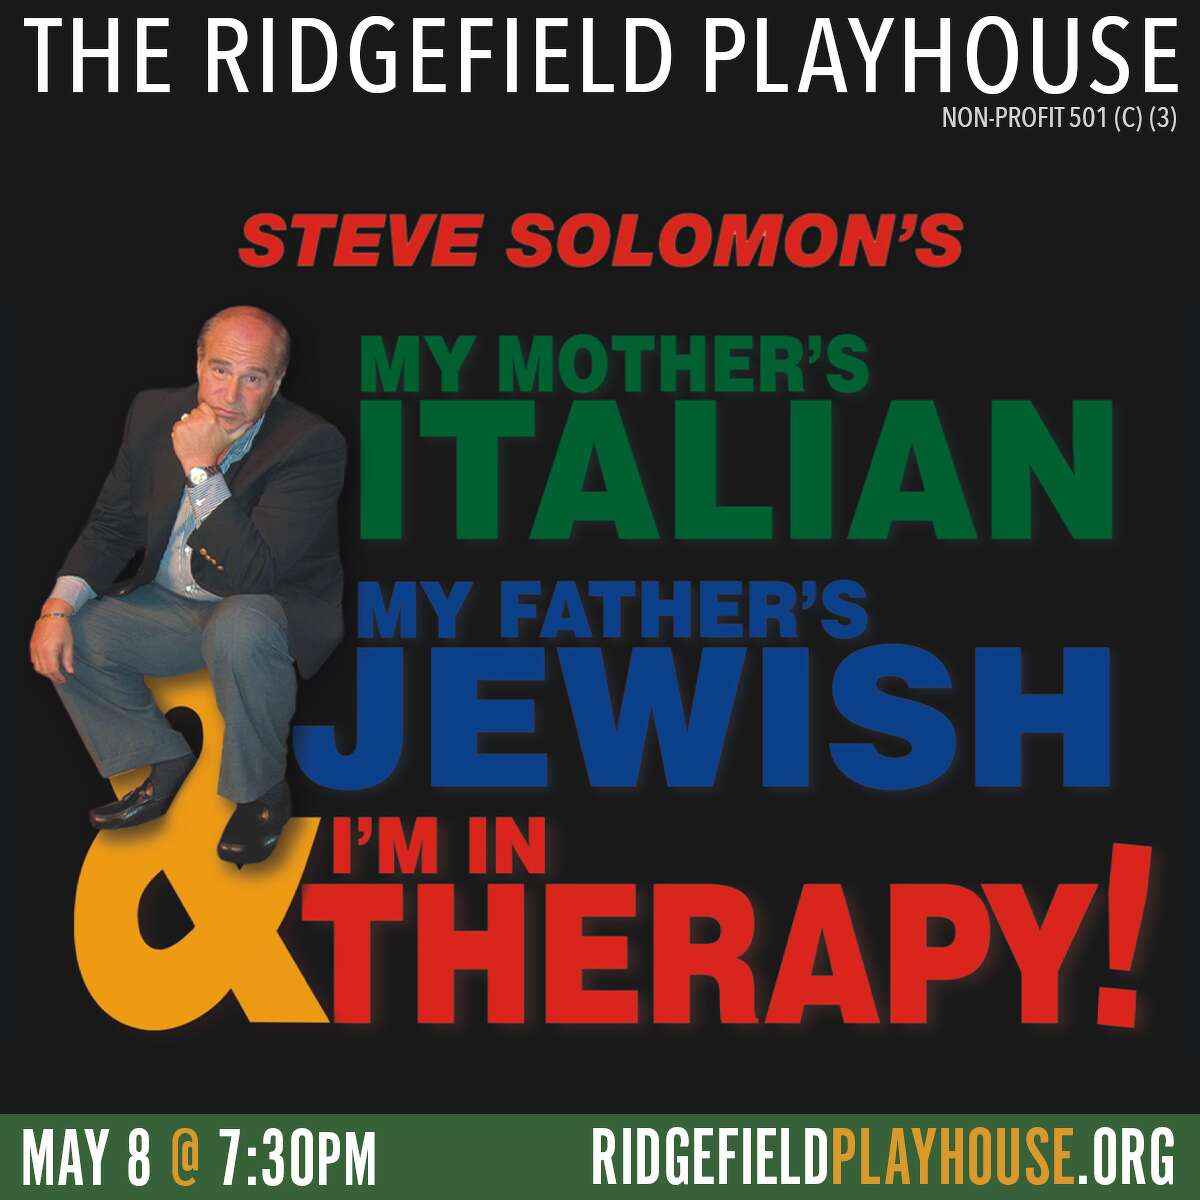 Steve Solomon's show won the Connecticut Critics Circle Award, was nominated for a San Francisco Drama Desk Award, and was previously named “Best New Off-Broadway Play” by Broadway.com.